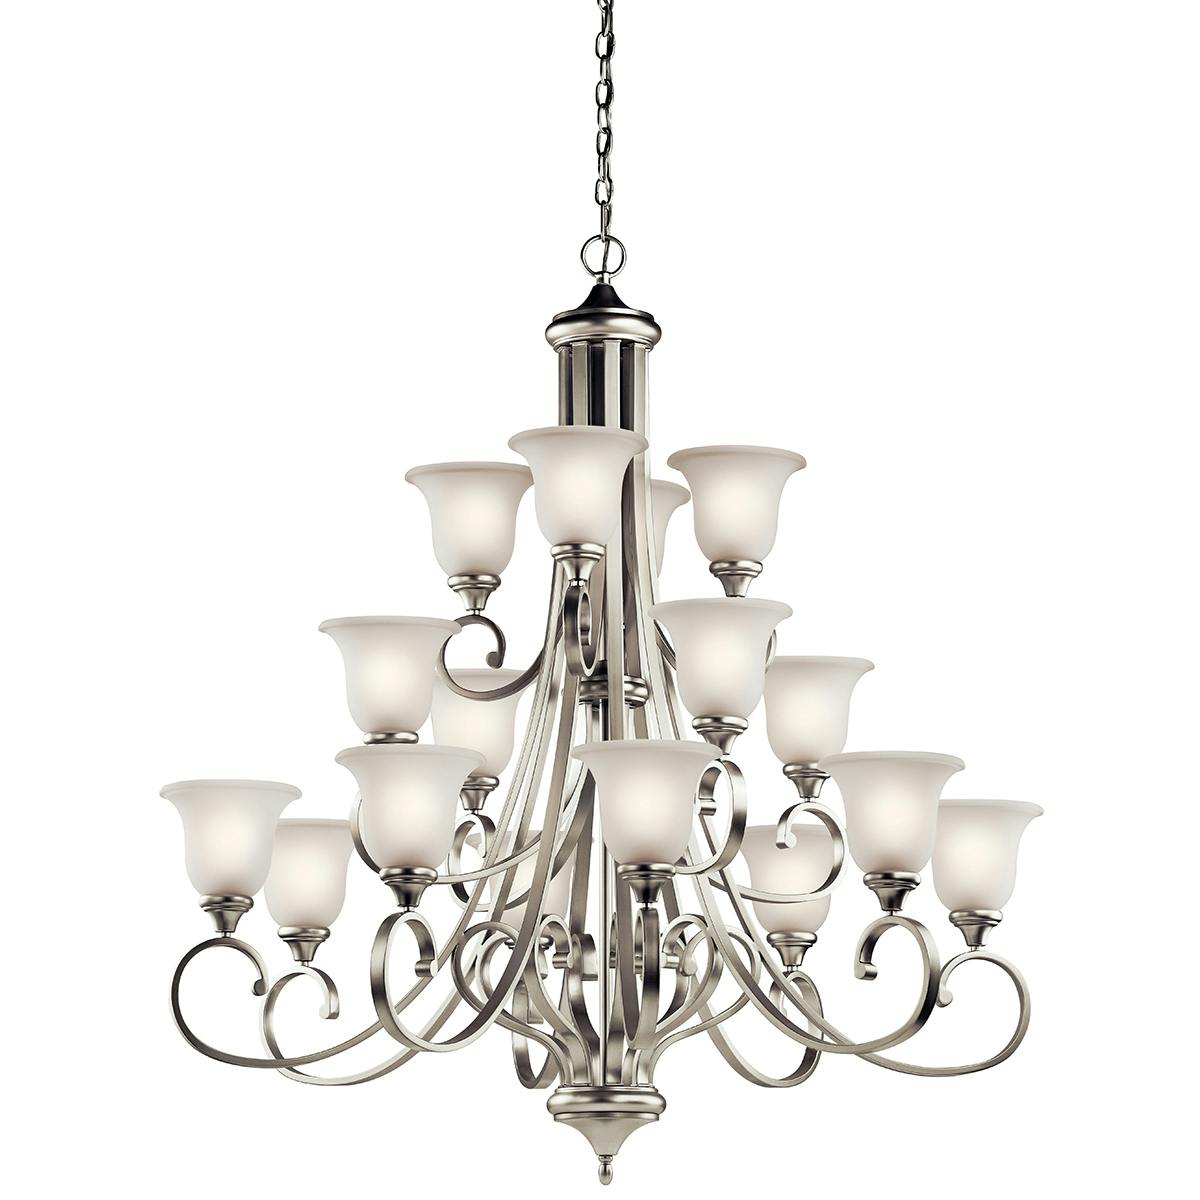 Monroe 16 Light Chandelier Brushed Nickel on a white background